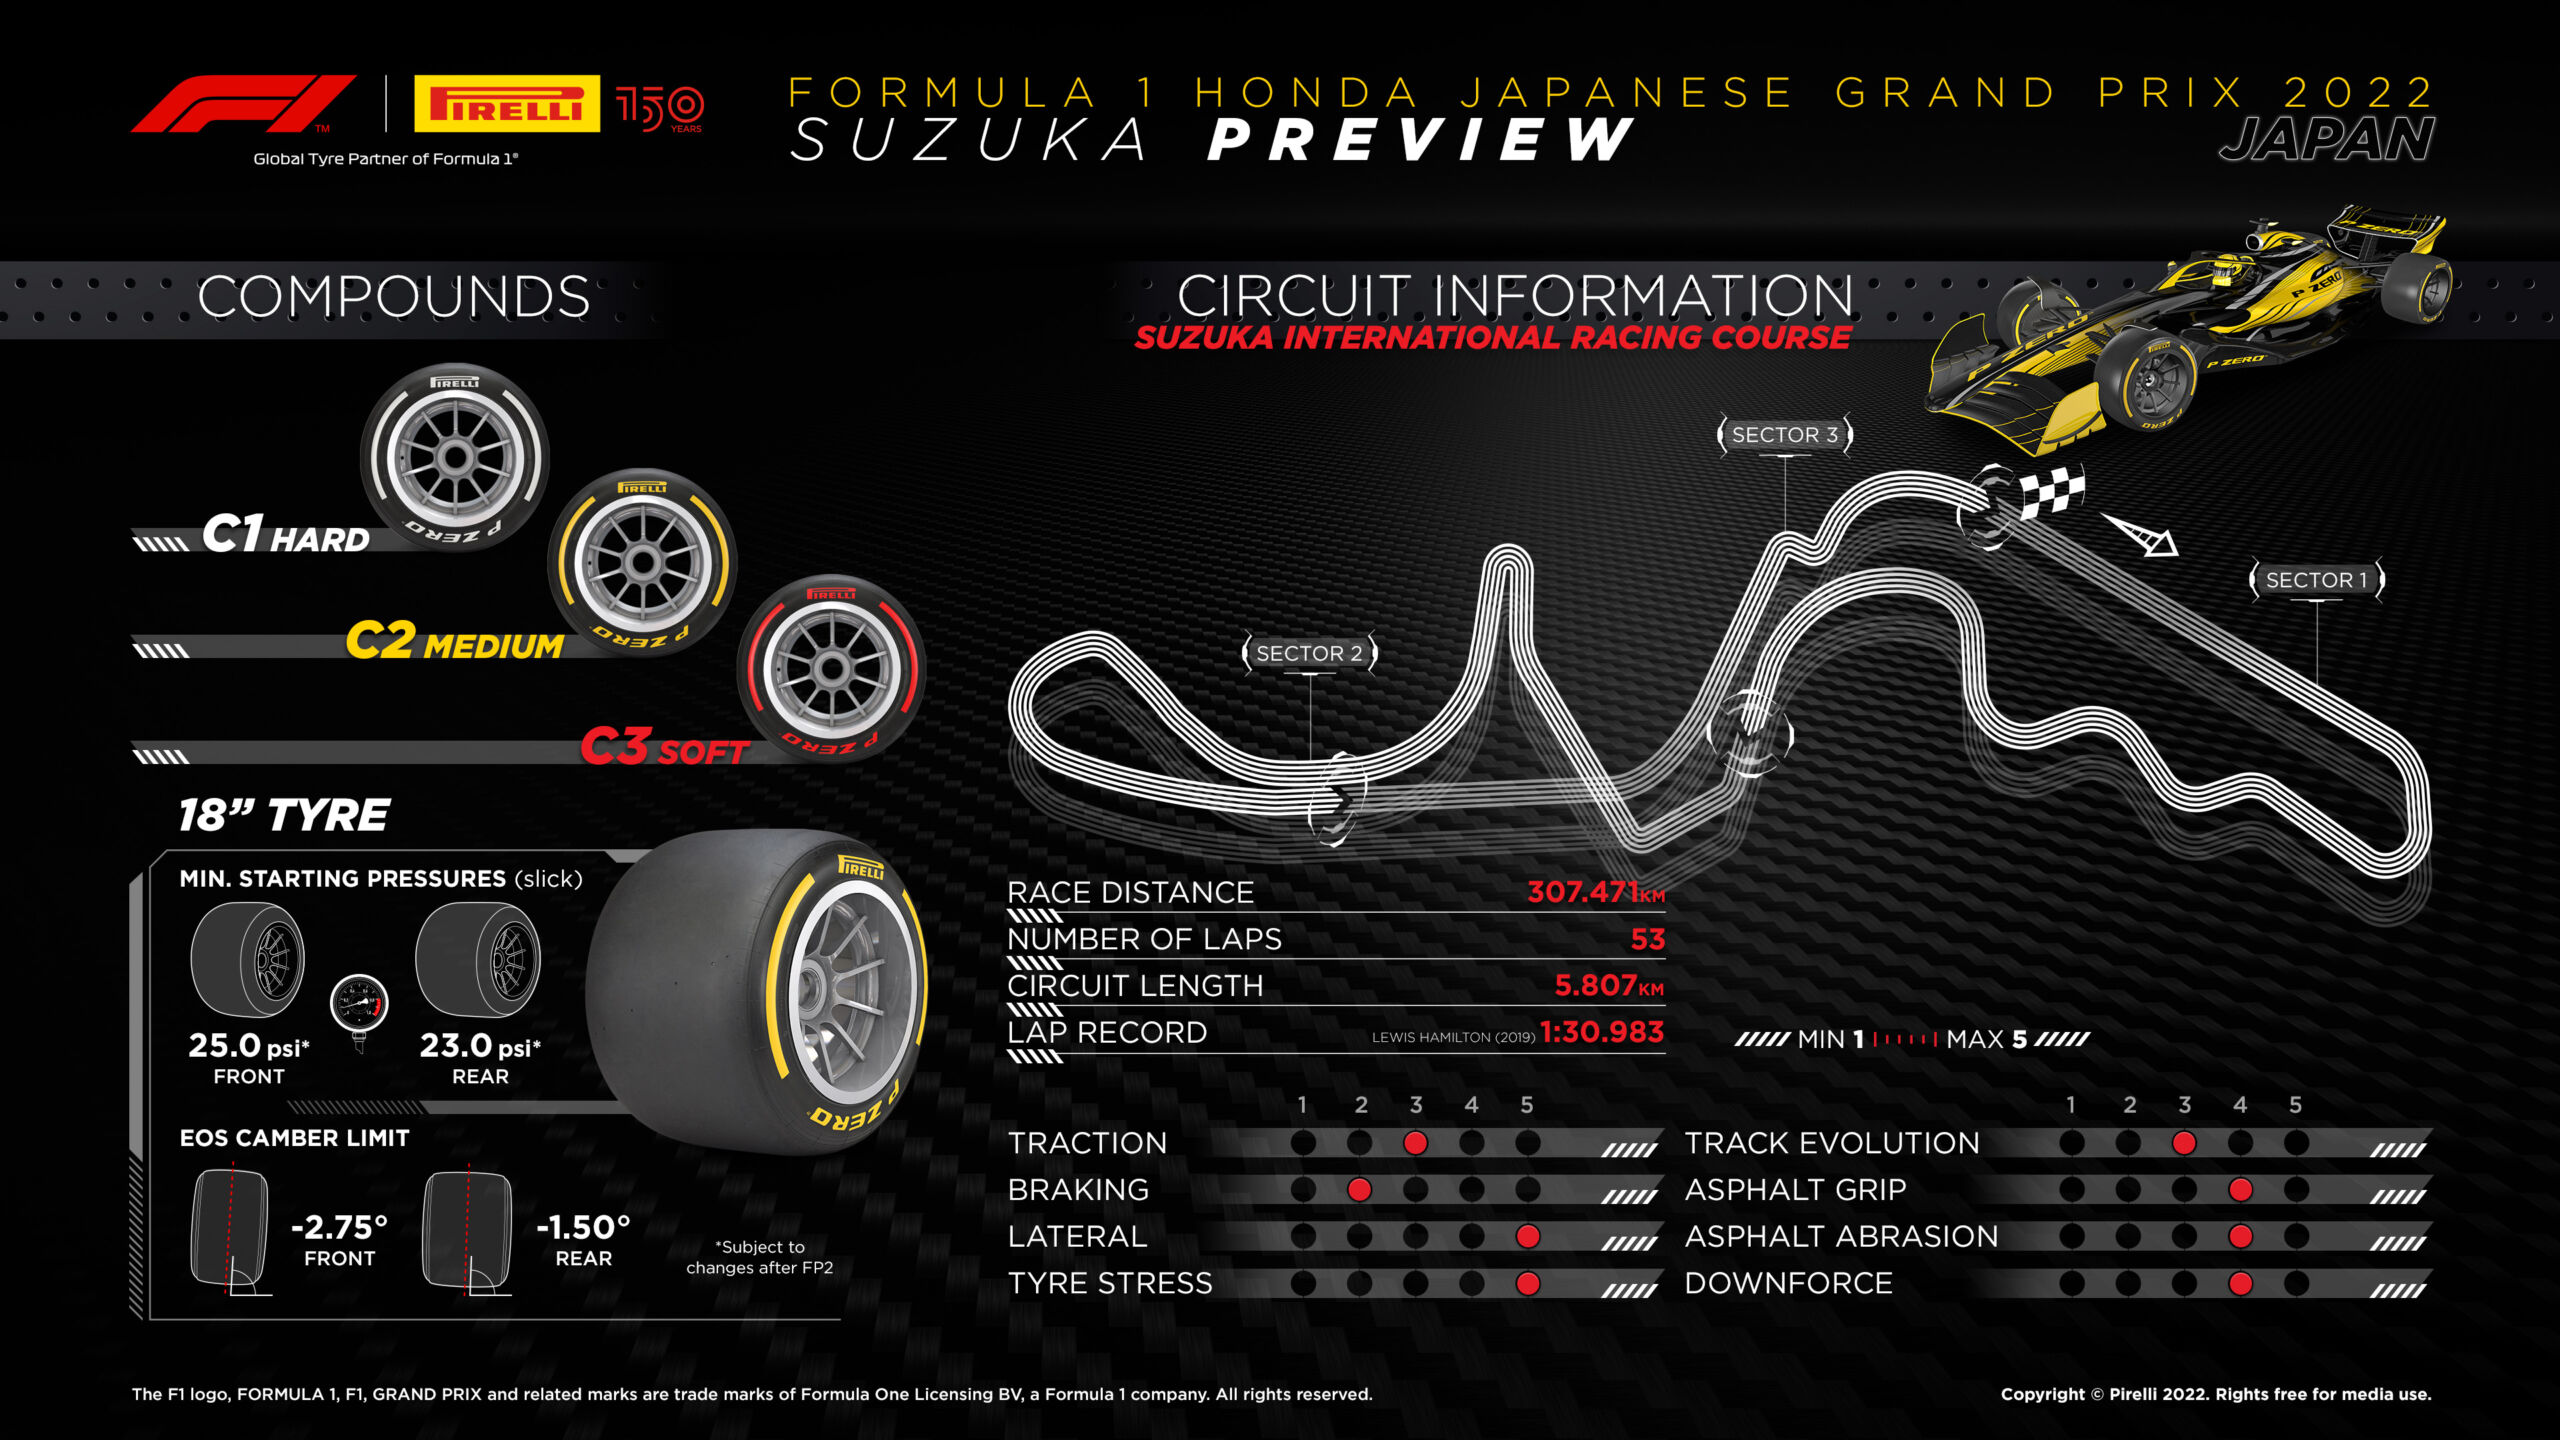 2022 Japanese Grand Prix Tyre Compounds